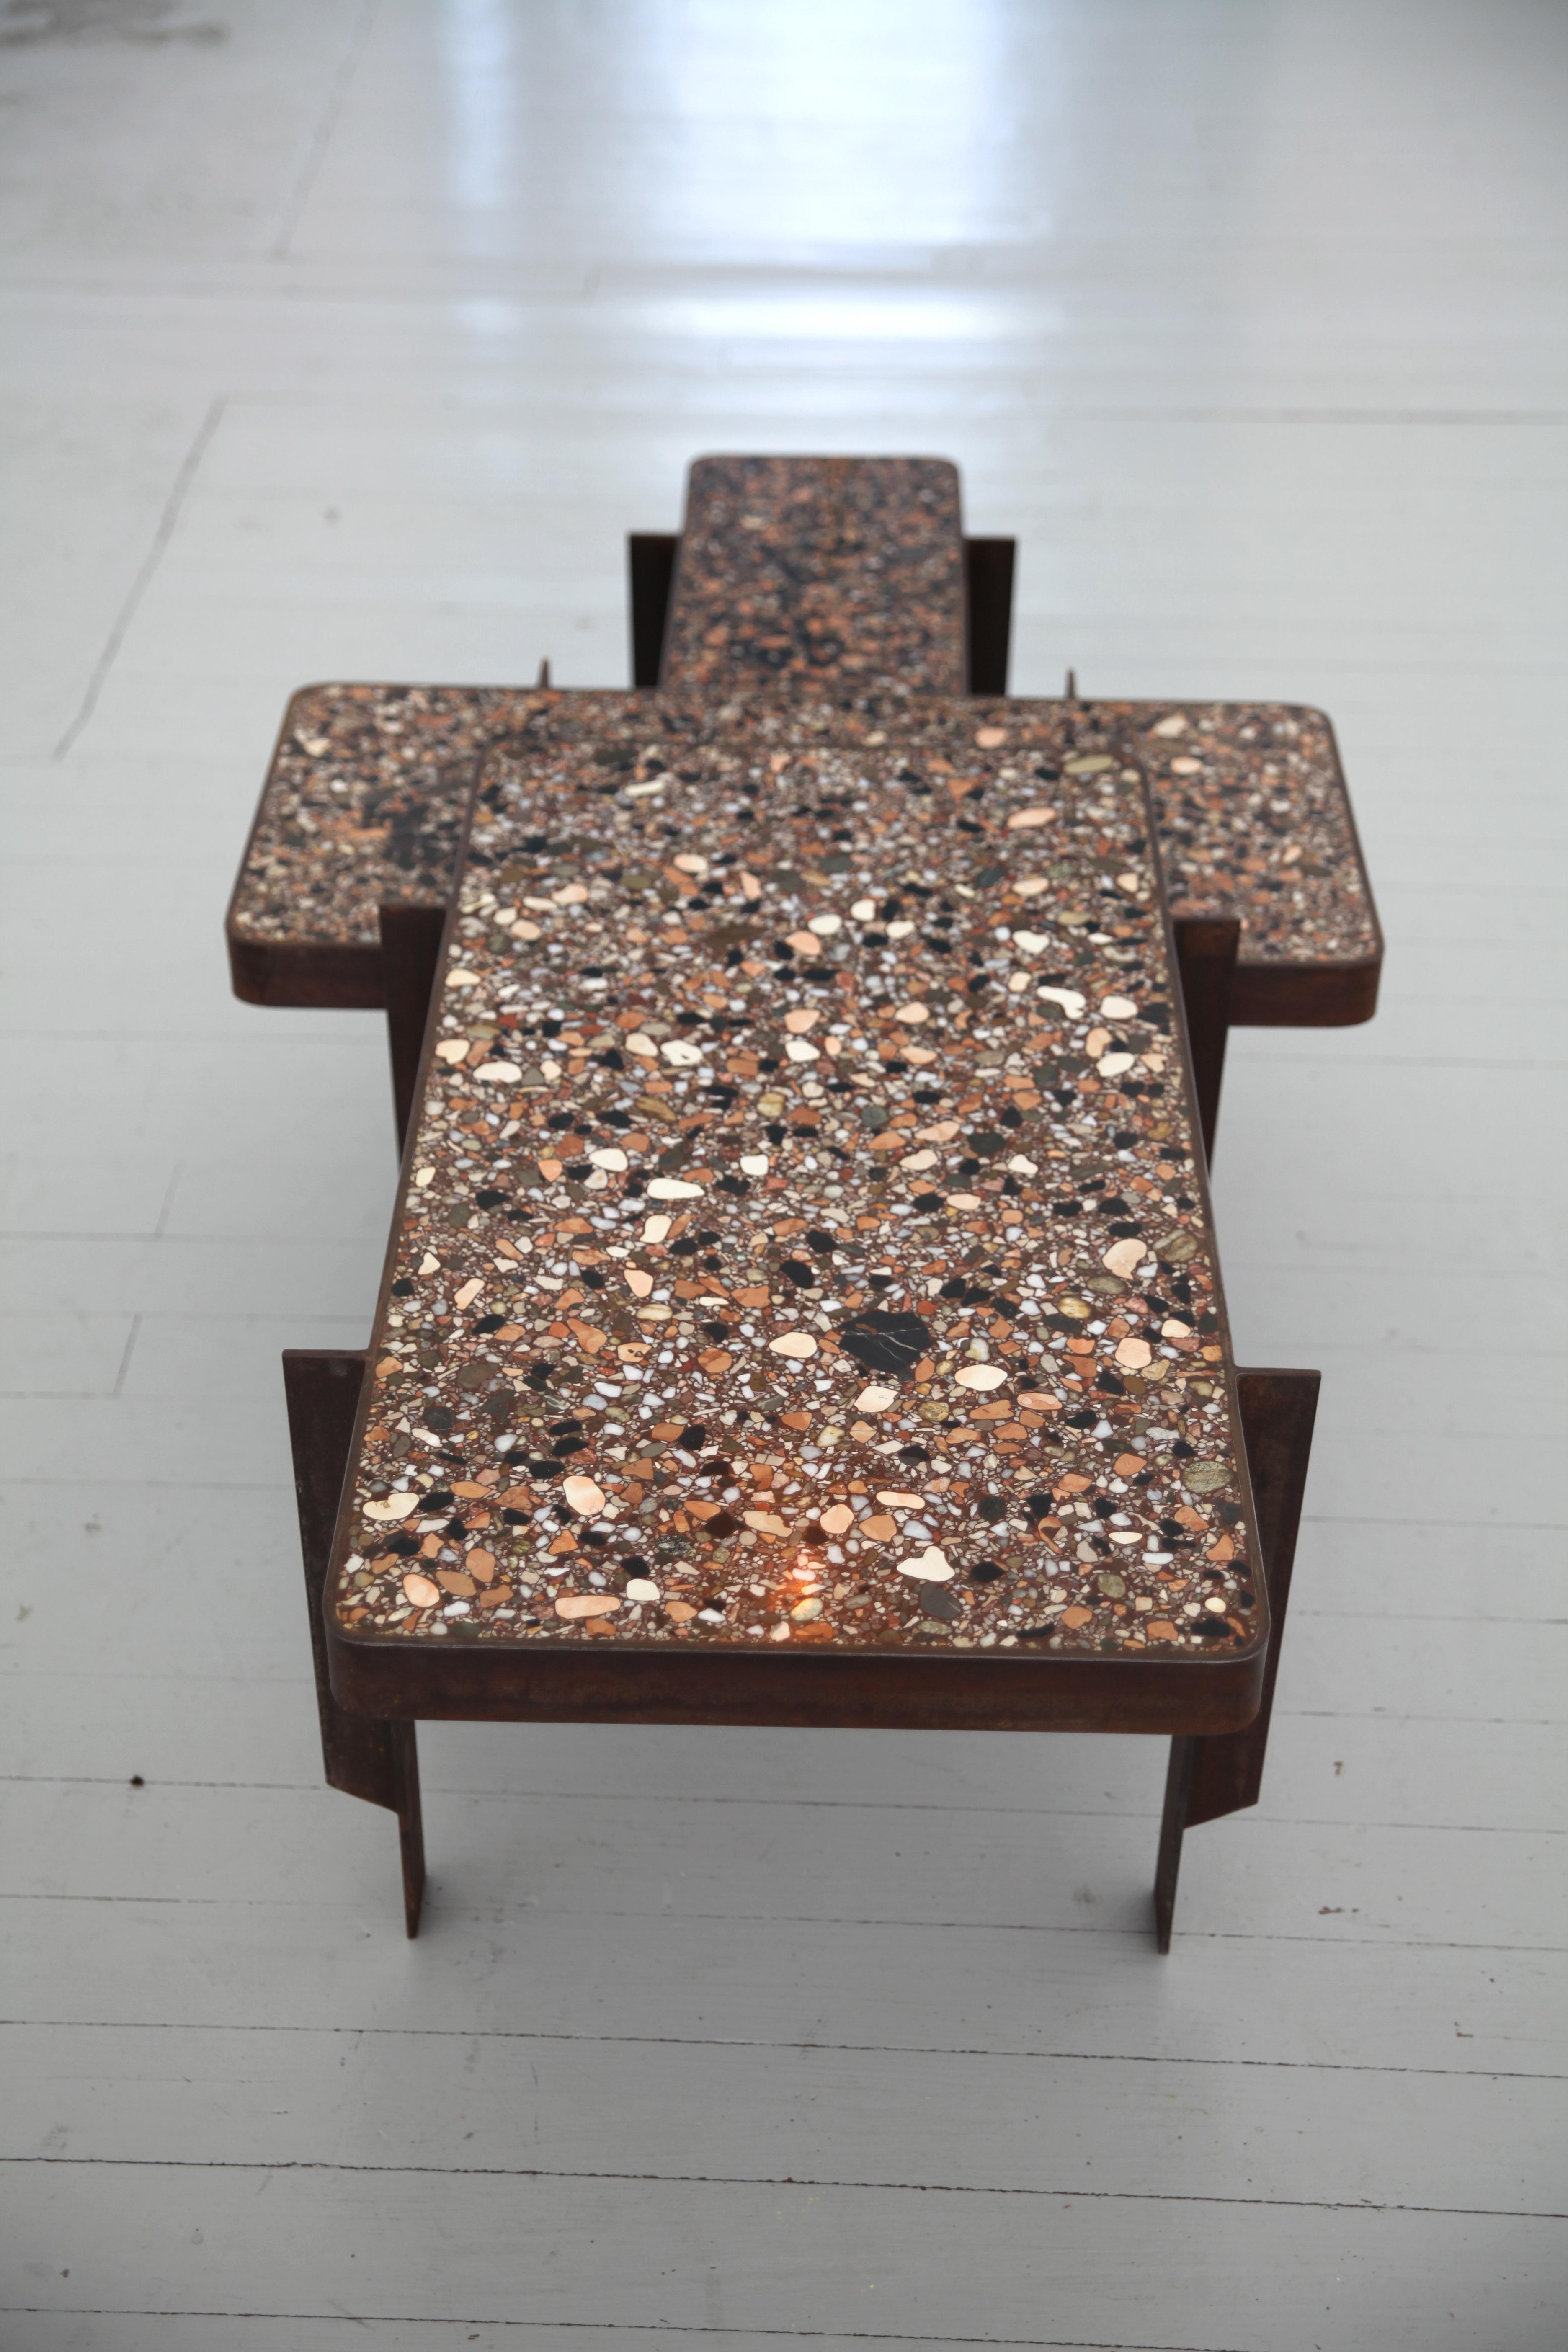 Felix Muhrhofer Contemporary Terrazzo Table with Corroded Steel Construction 1